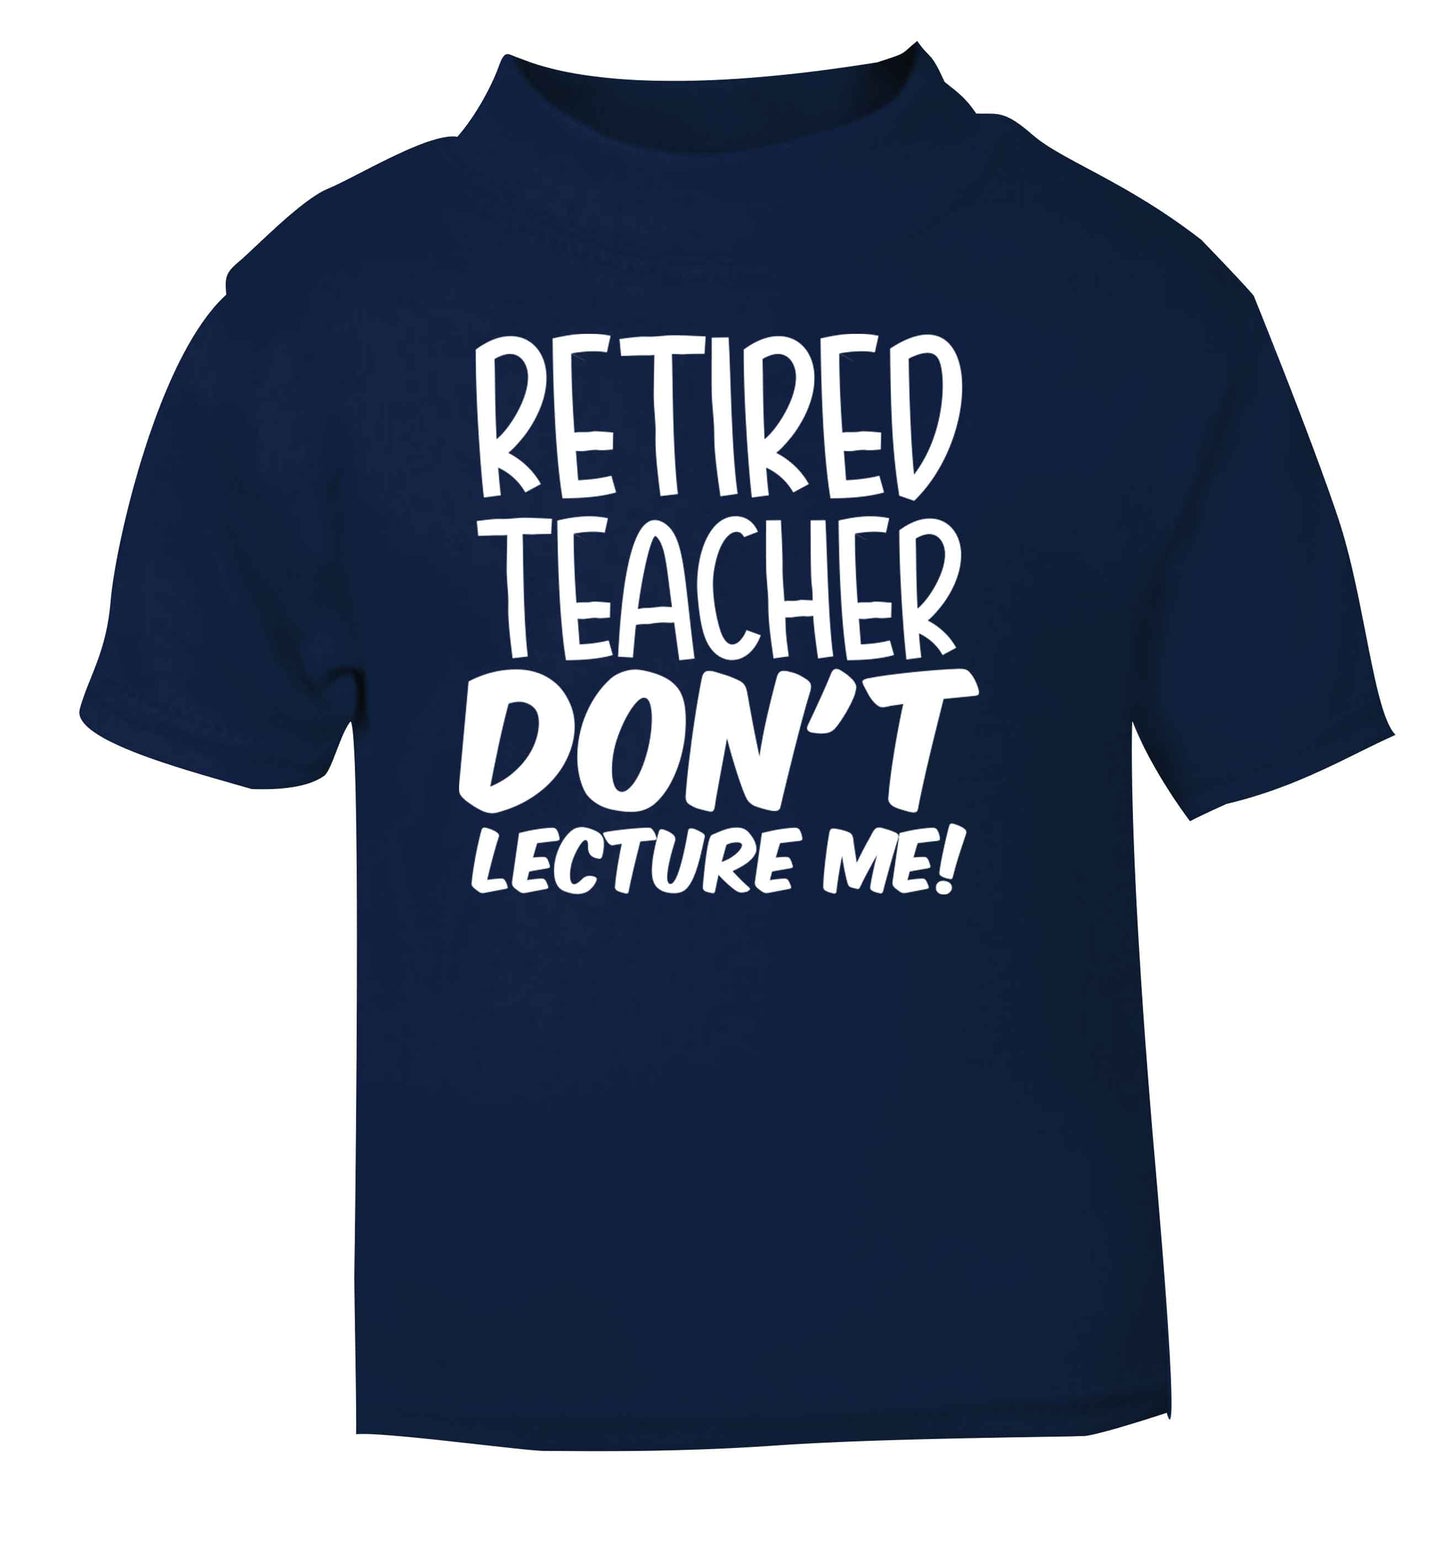 Retired teacher don't lecture me! navy Baby Toddler Tshirt 2 Years